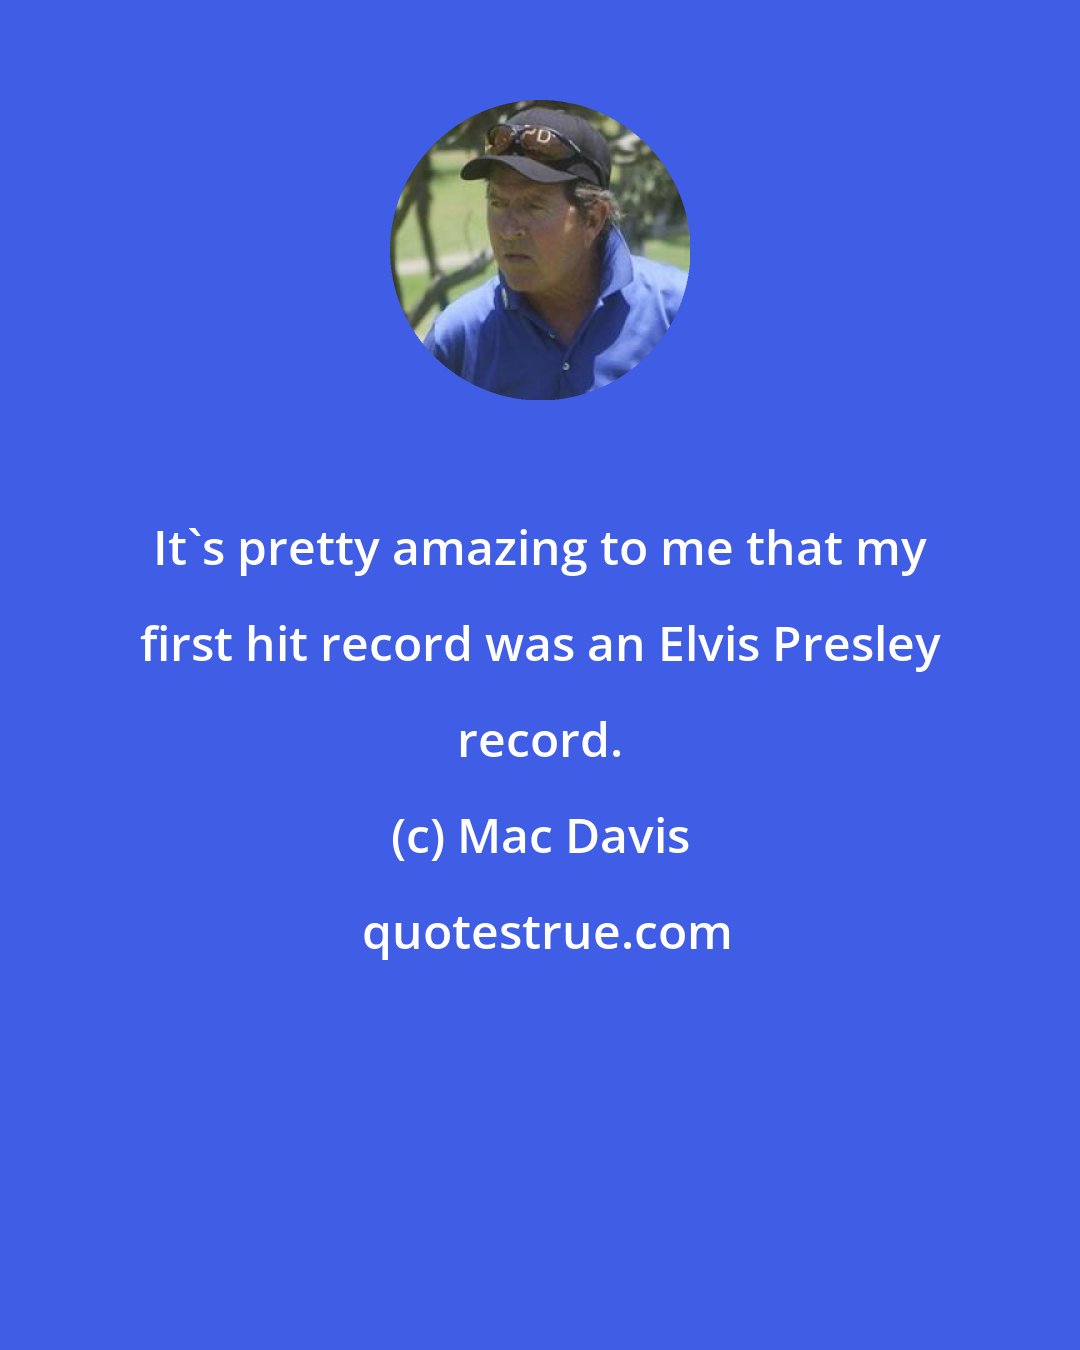 Mac Davis: It's pretty amazing to me that my first hit record was an Elvis Presley record.